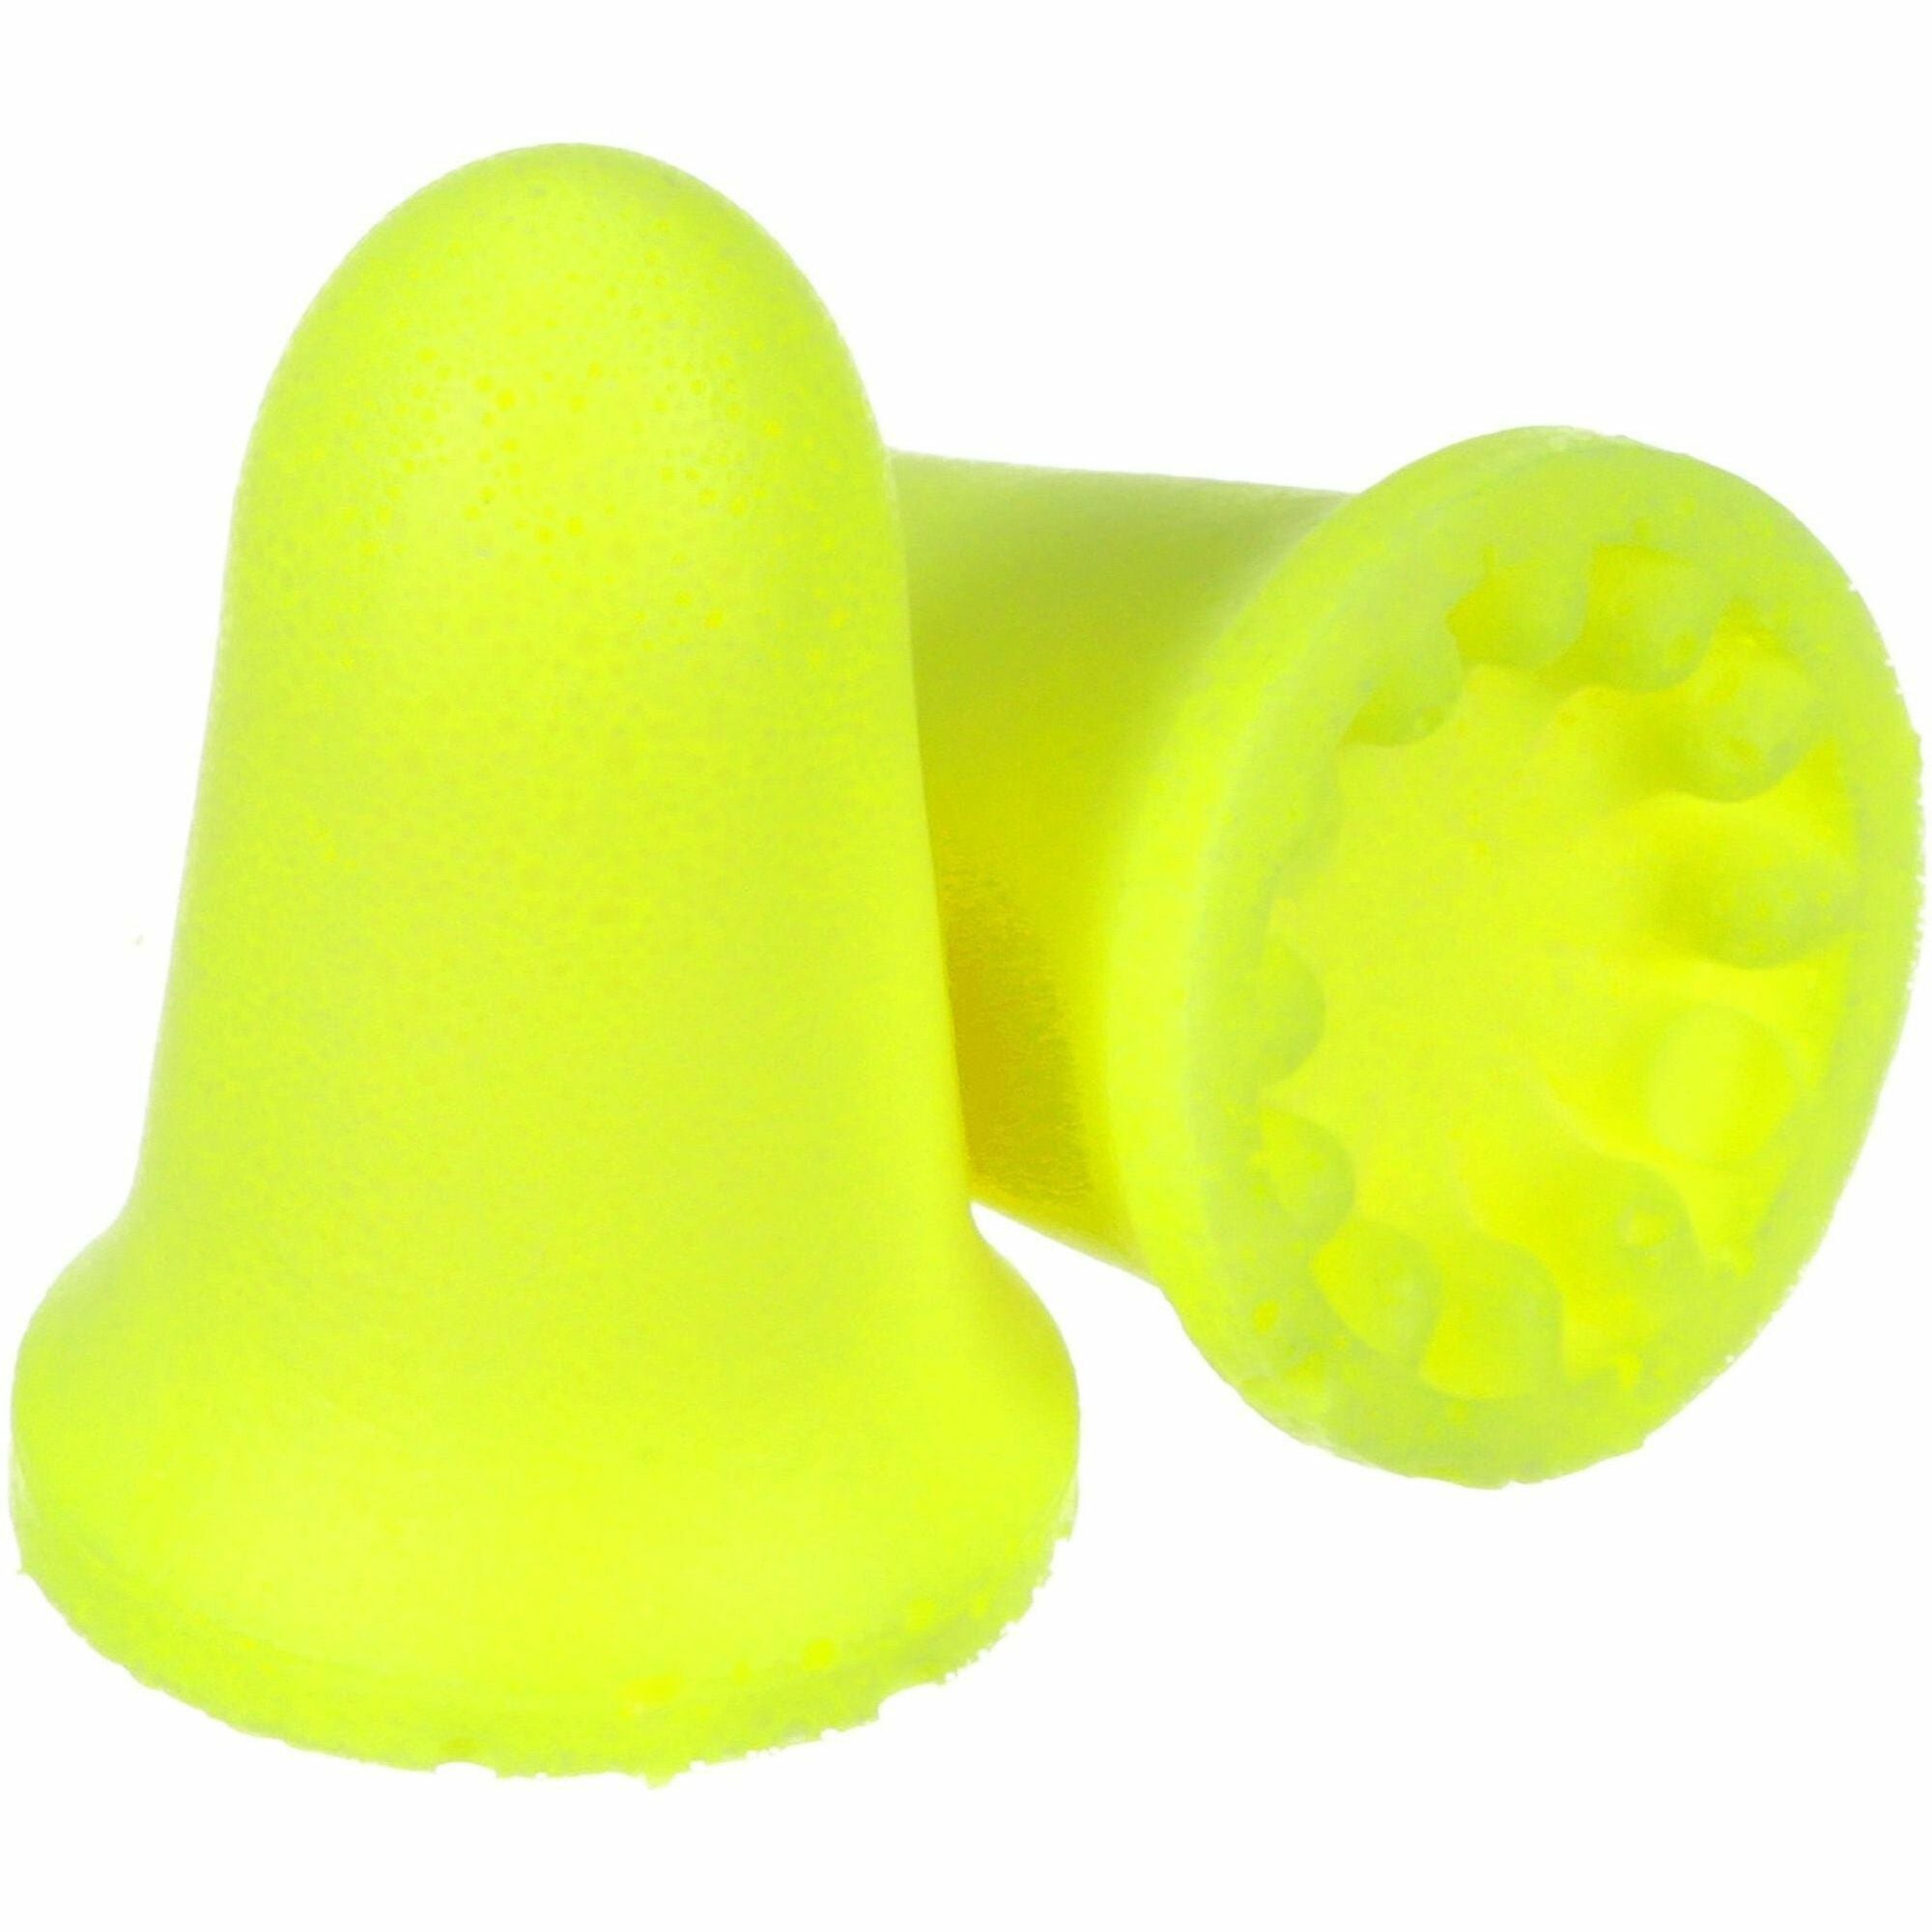 3m-e-a-rsoft-fx-earplugs-recommended-for-automotive-manufacturing-military-maintenance-repair-mining-oil-&-gas-pharmaceutical-transportation-industrial-33-noise-reduction-rating-protection-polyurethane-yellow-uncorded-insulated_mmm3121261 - 1